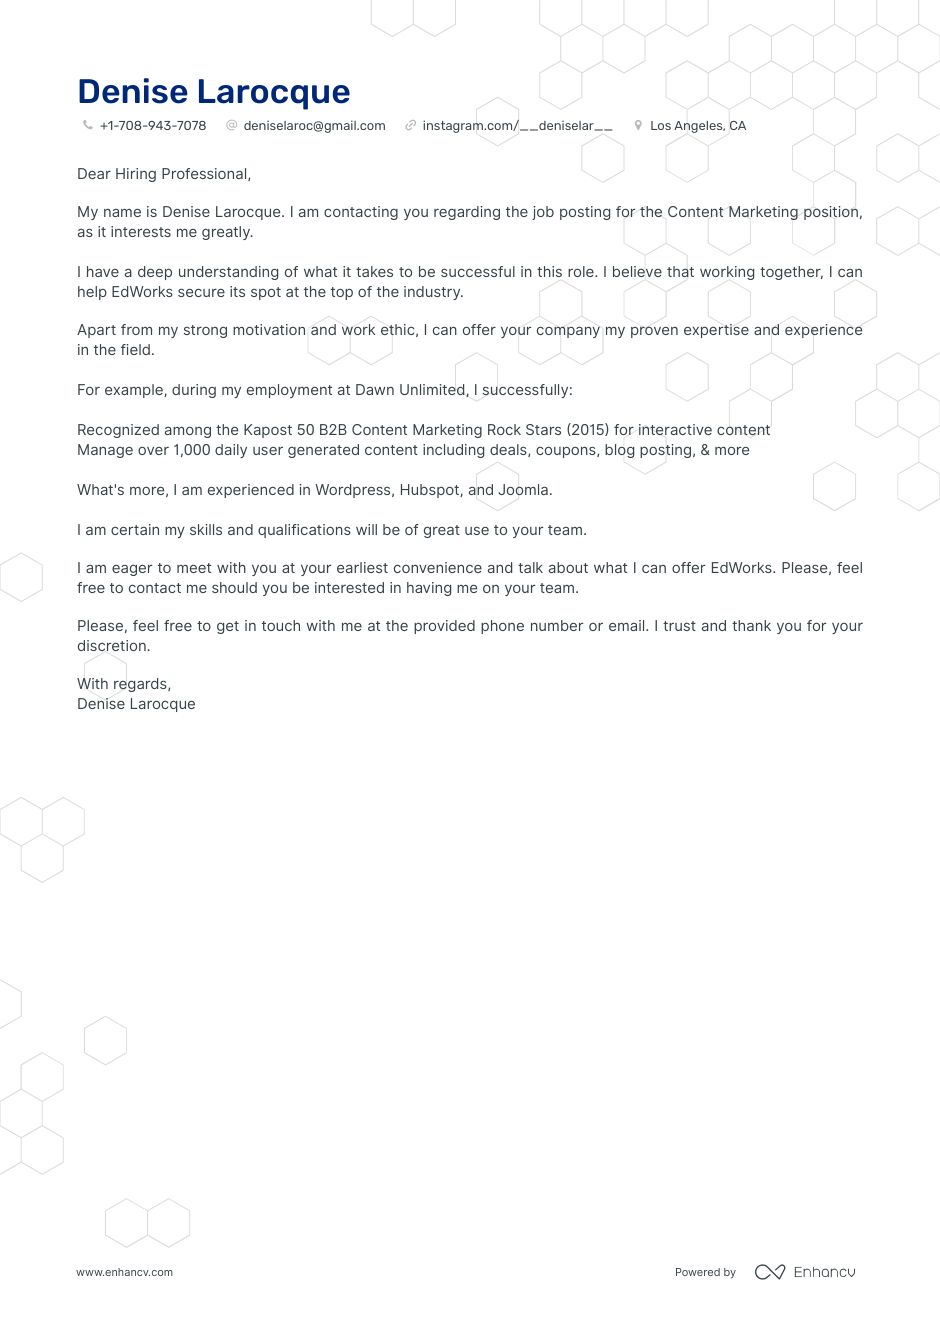 content-marketing-coverletter.png